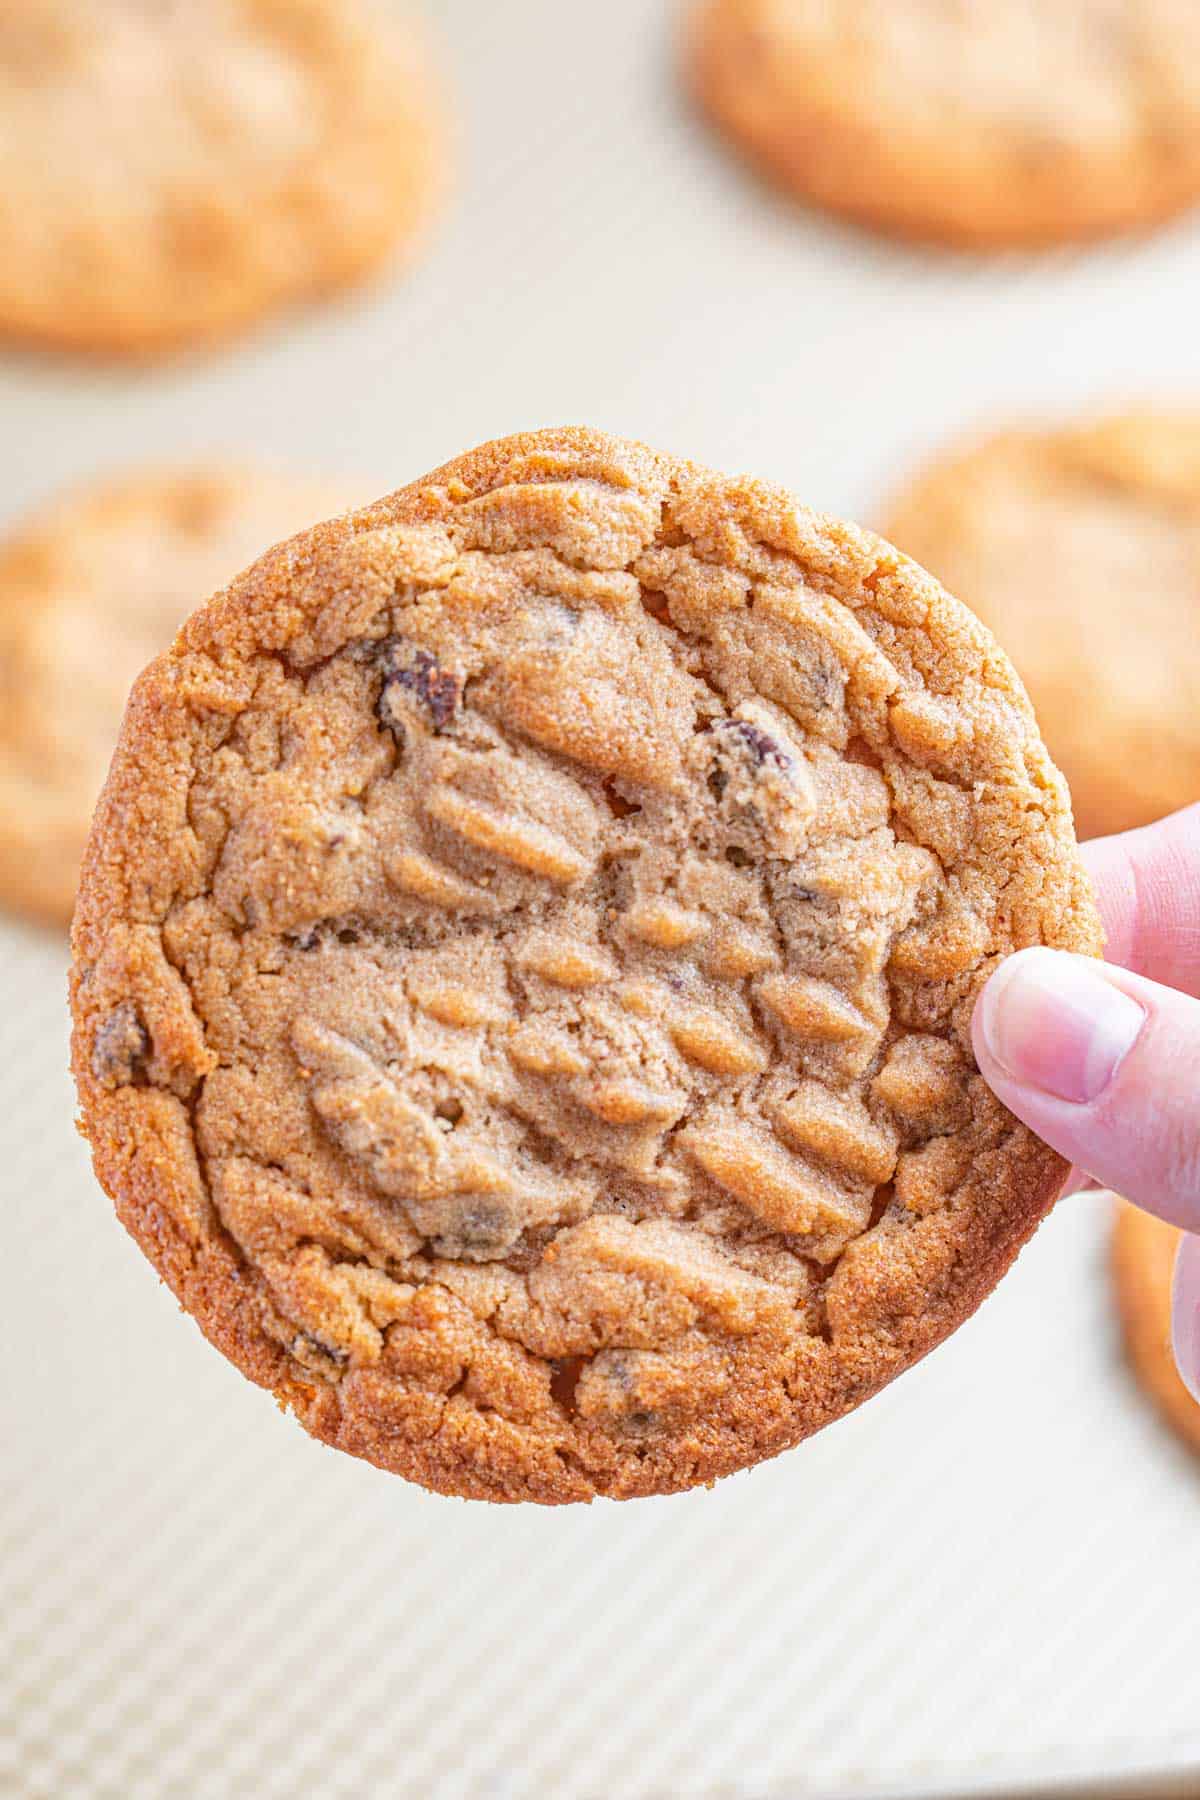 Chocolate Peanut Butter Chip Cookies - Striped Spatula